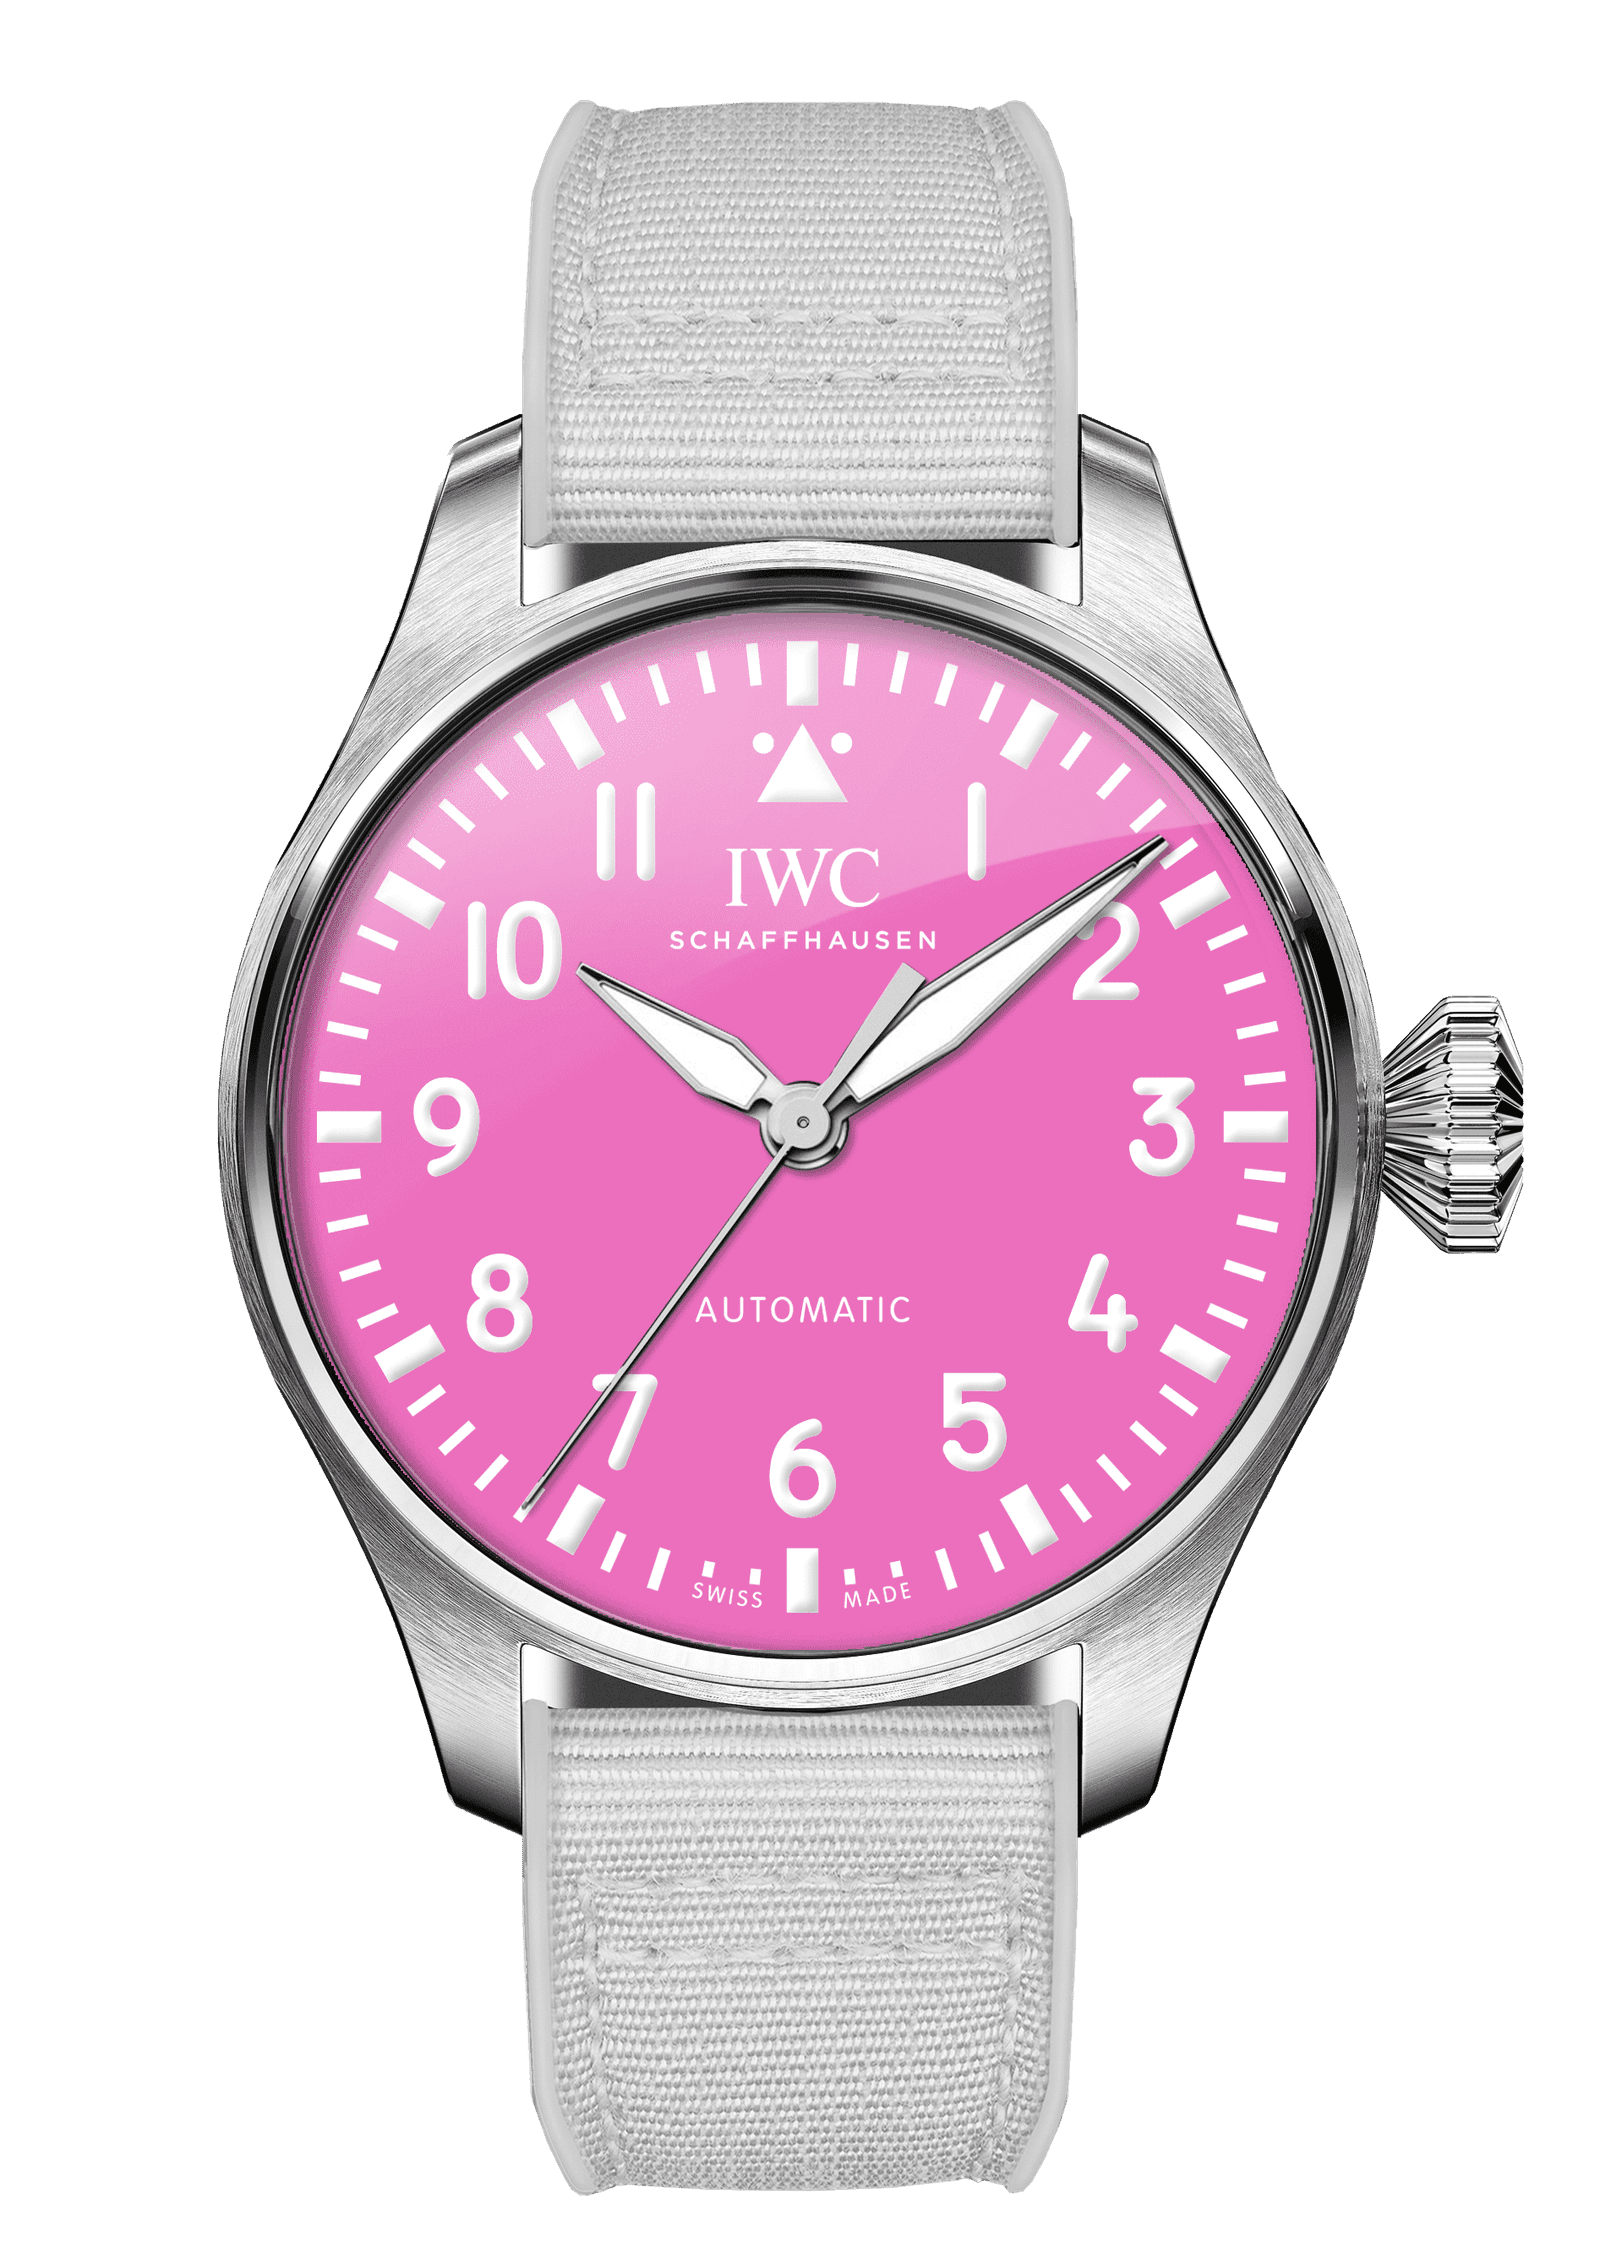 FEATURED: The Pink Dial Project